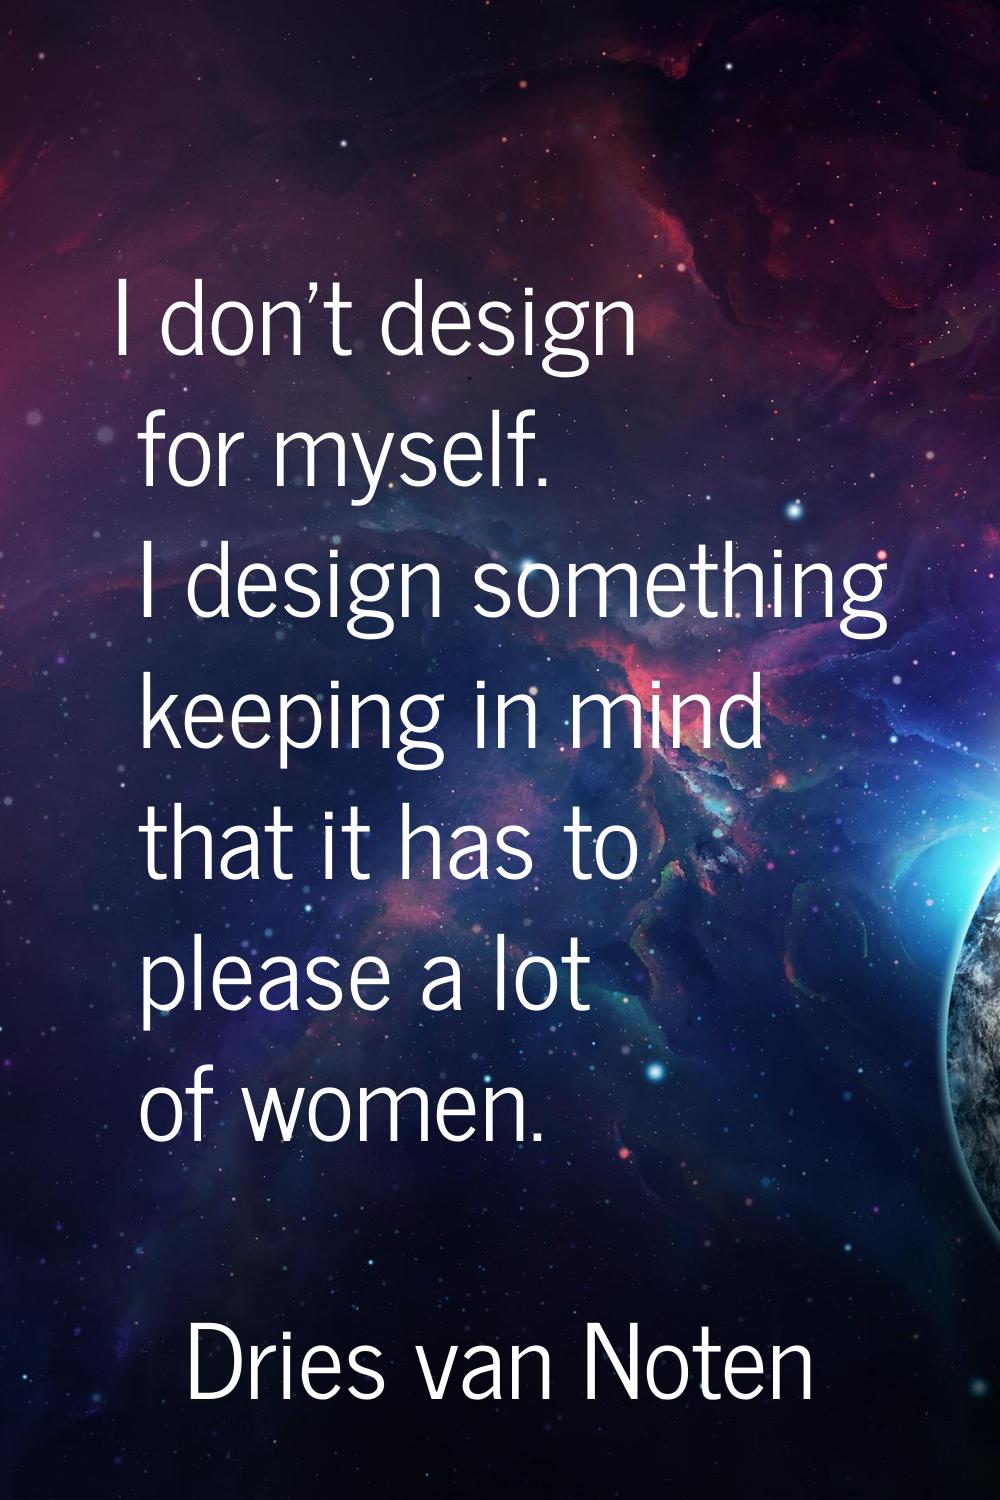 I don't design for myself. I design something keeping in mind that it has to please a lot of women.